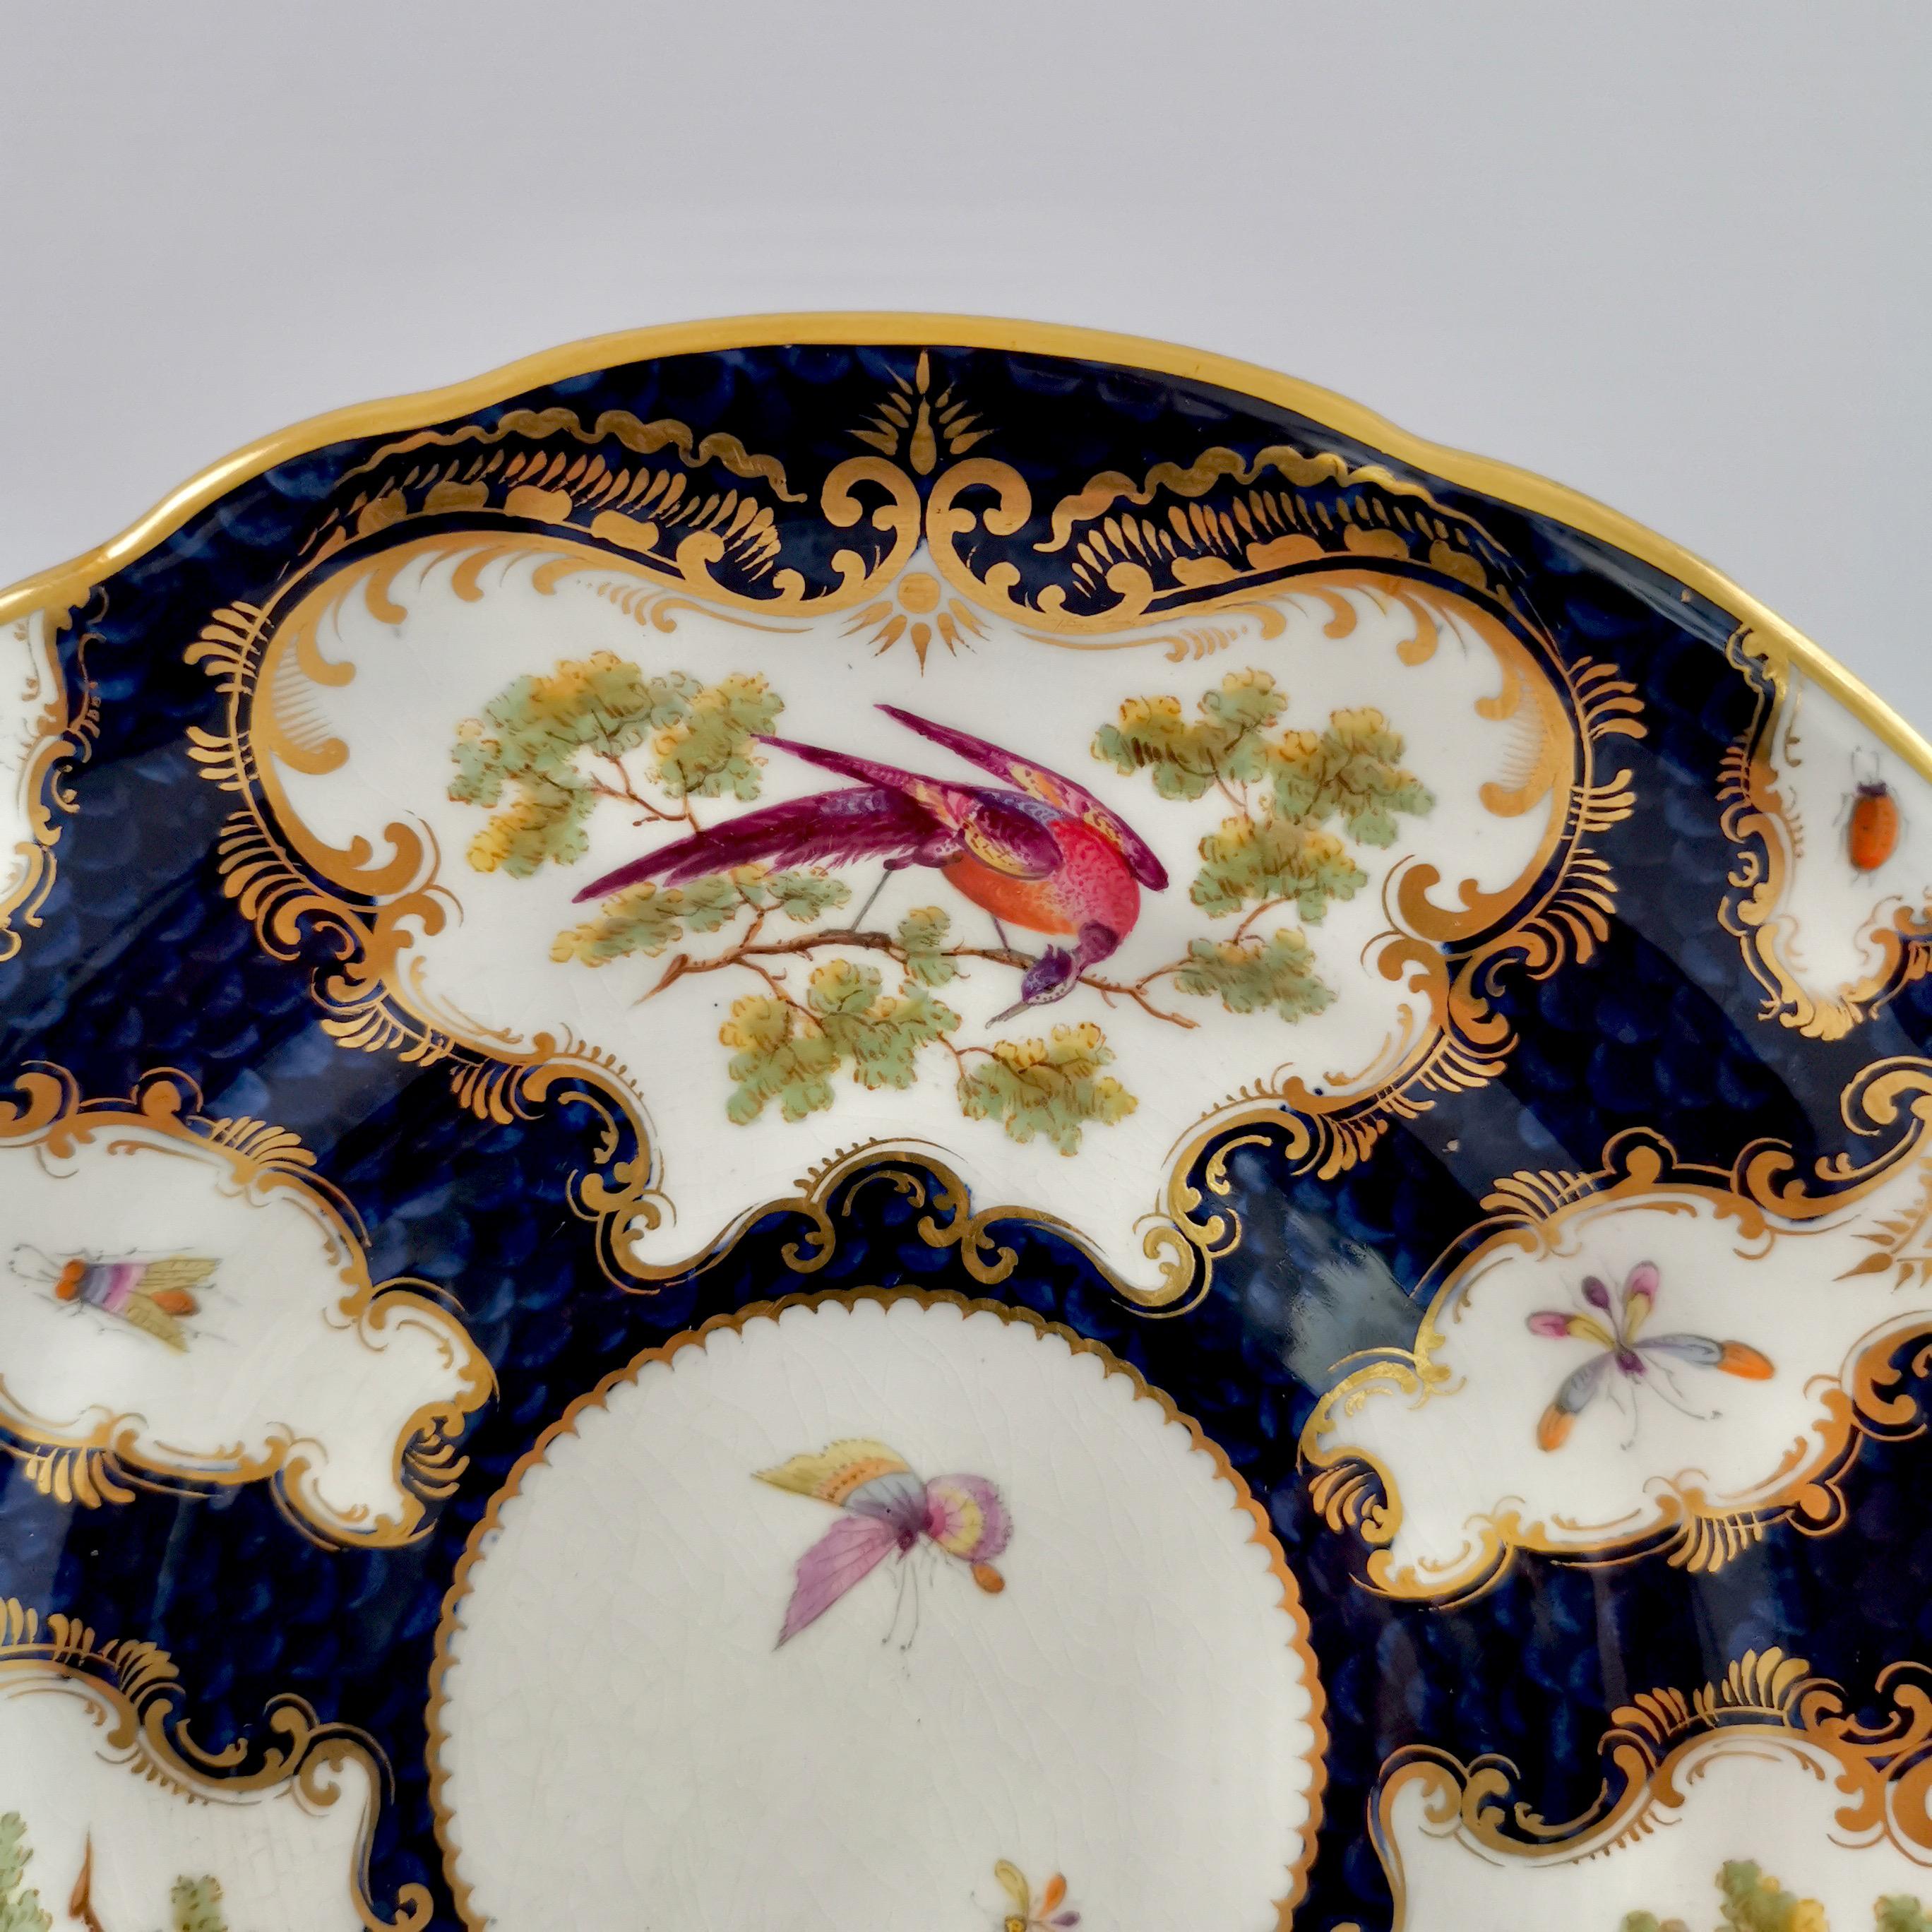 Georgian Grainger Worcester Porcelain Plate, Blue Sèvres Birds and Insects circa 1880 '2'